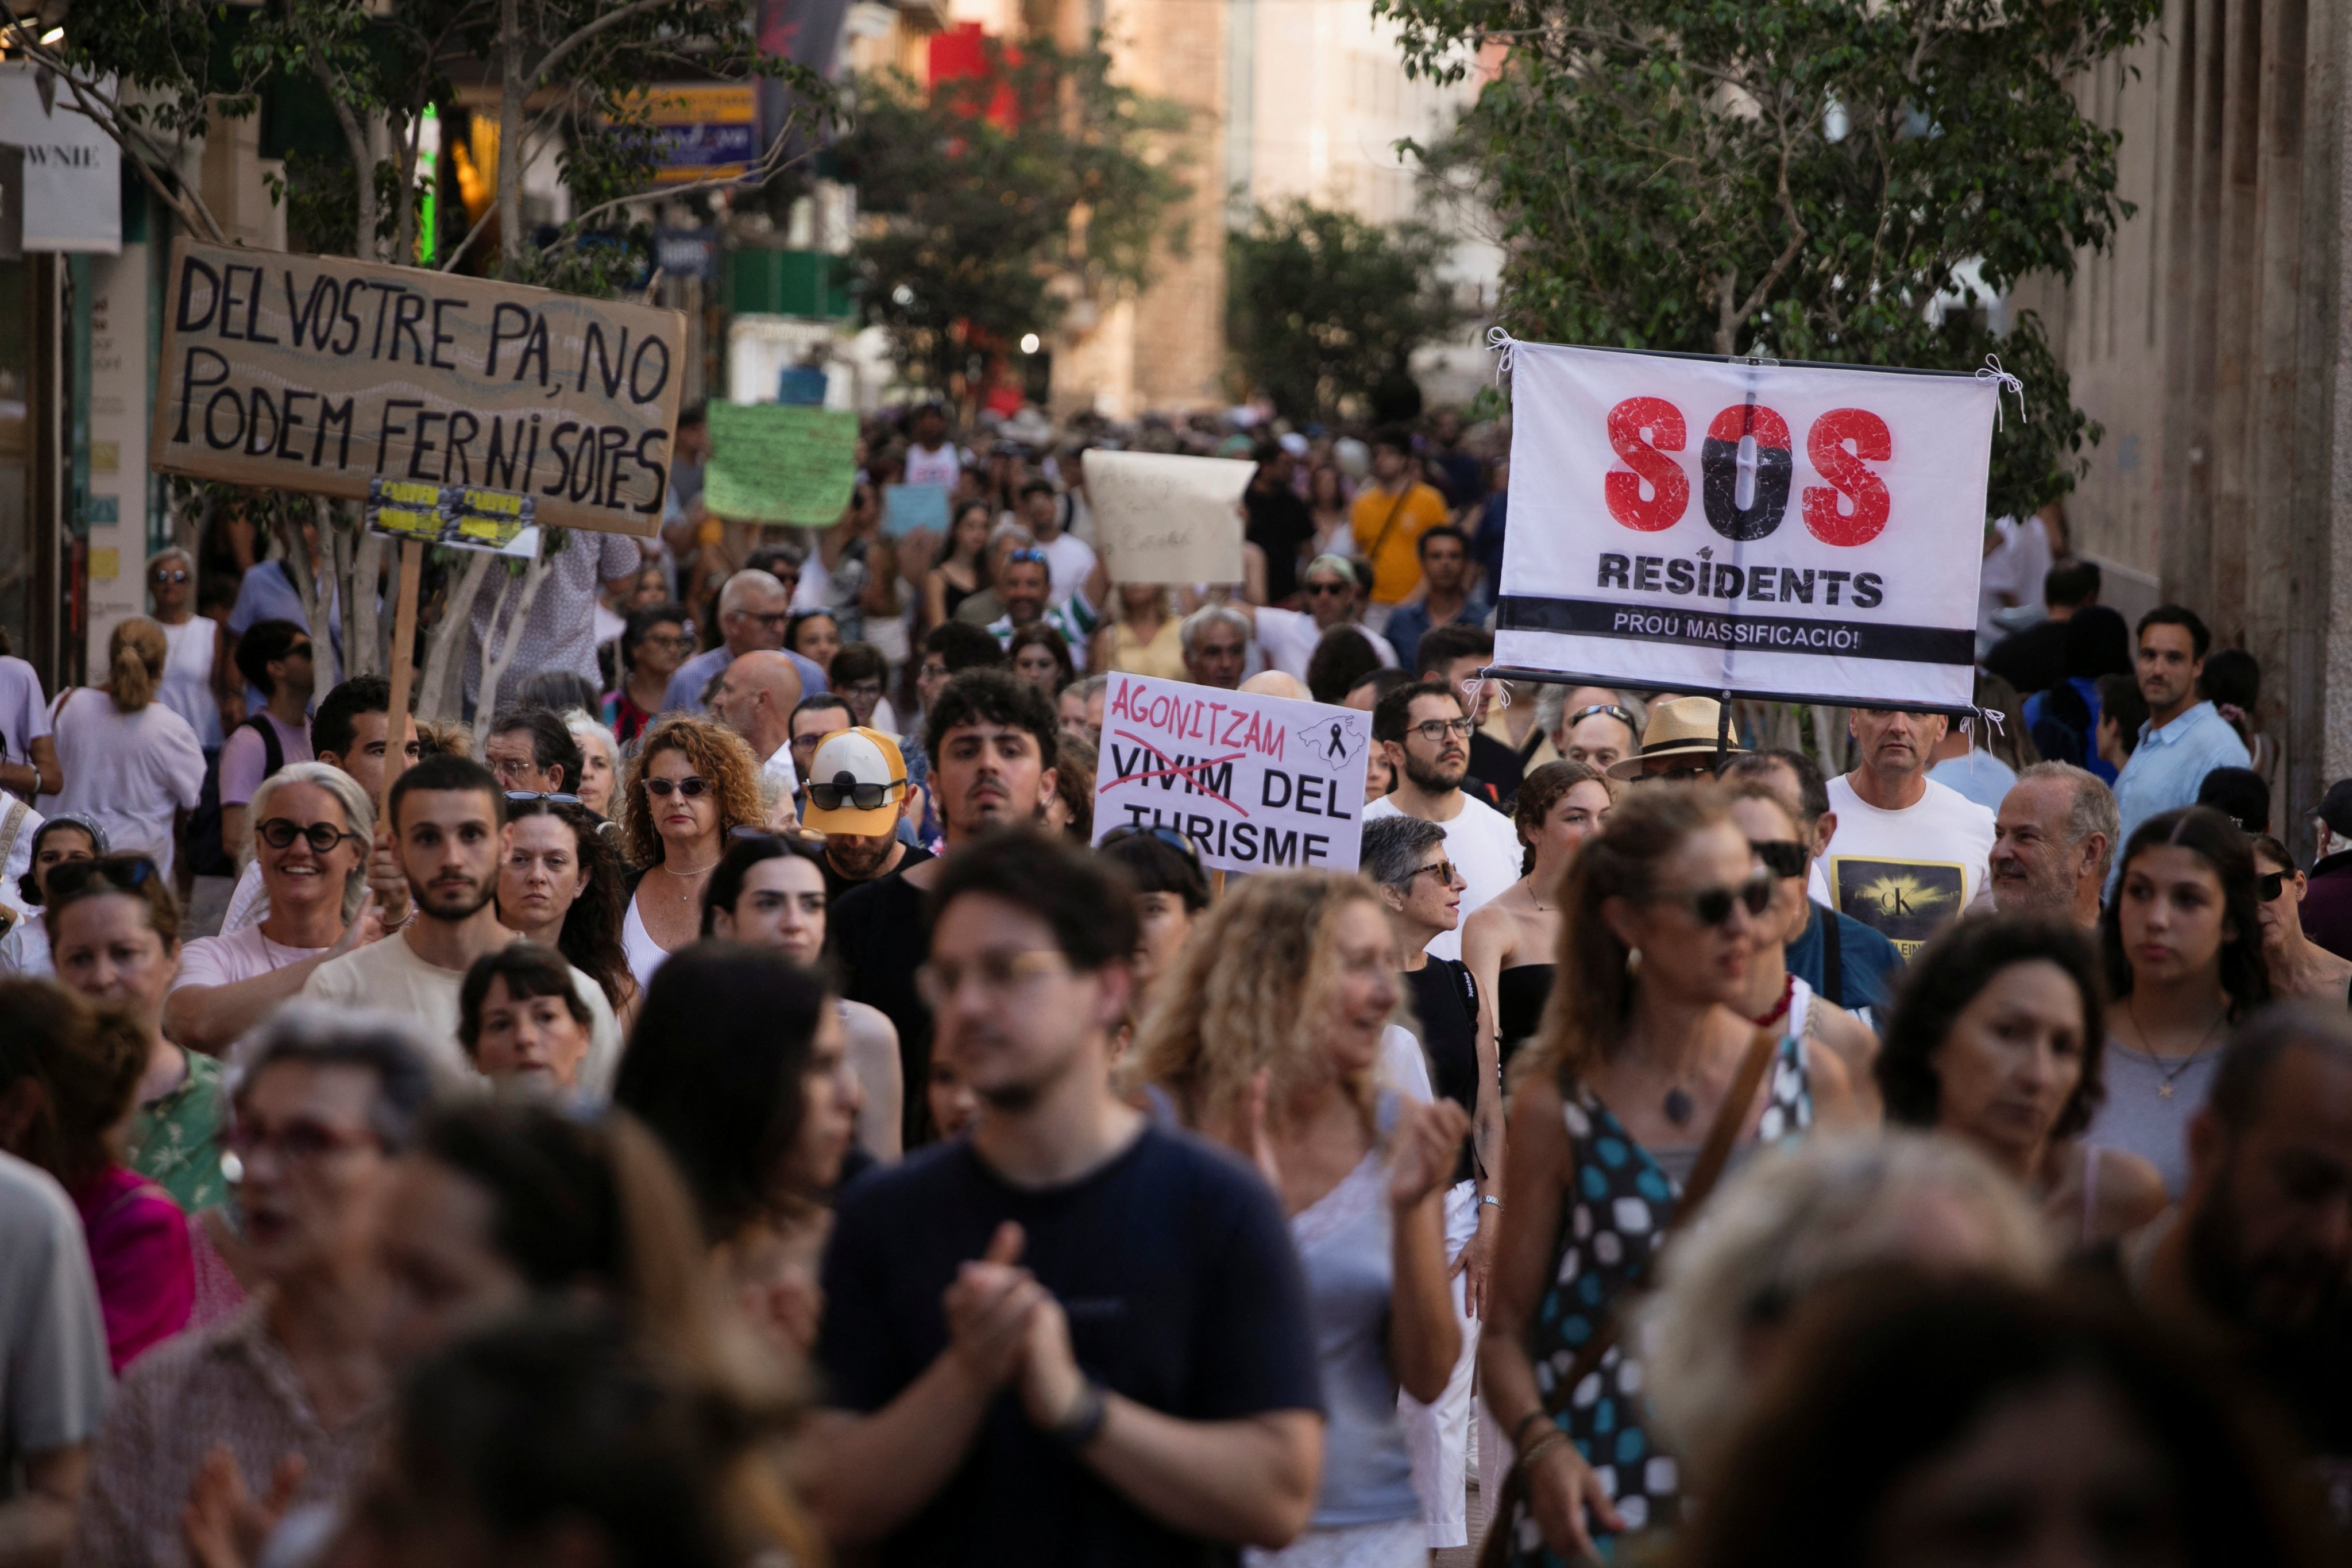 People take part in a protest against mass tourism in Palma de Mallorca, Spain on Sunday. Photo: Reuters